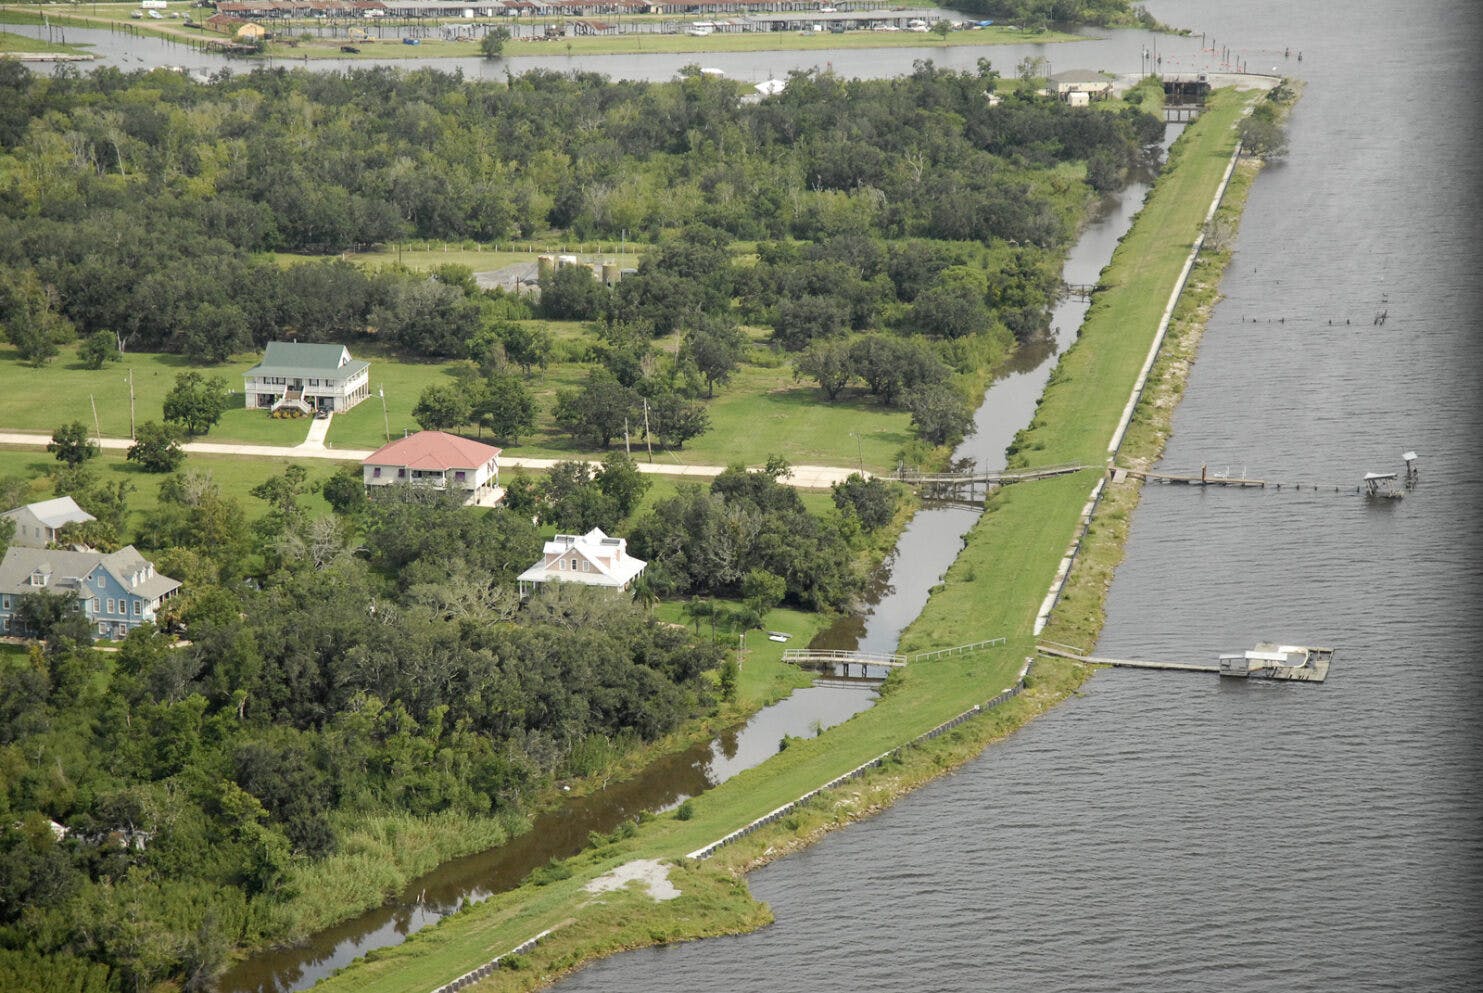 Full scale installation of the EEAS began in 2015 and has since been installed on over 100 miles of earthen levees in the New Orleans area. Since installation, multiple levees have experienced overtopping from major hurricanes, but have not breeched.